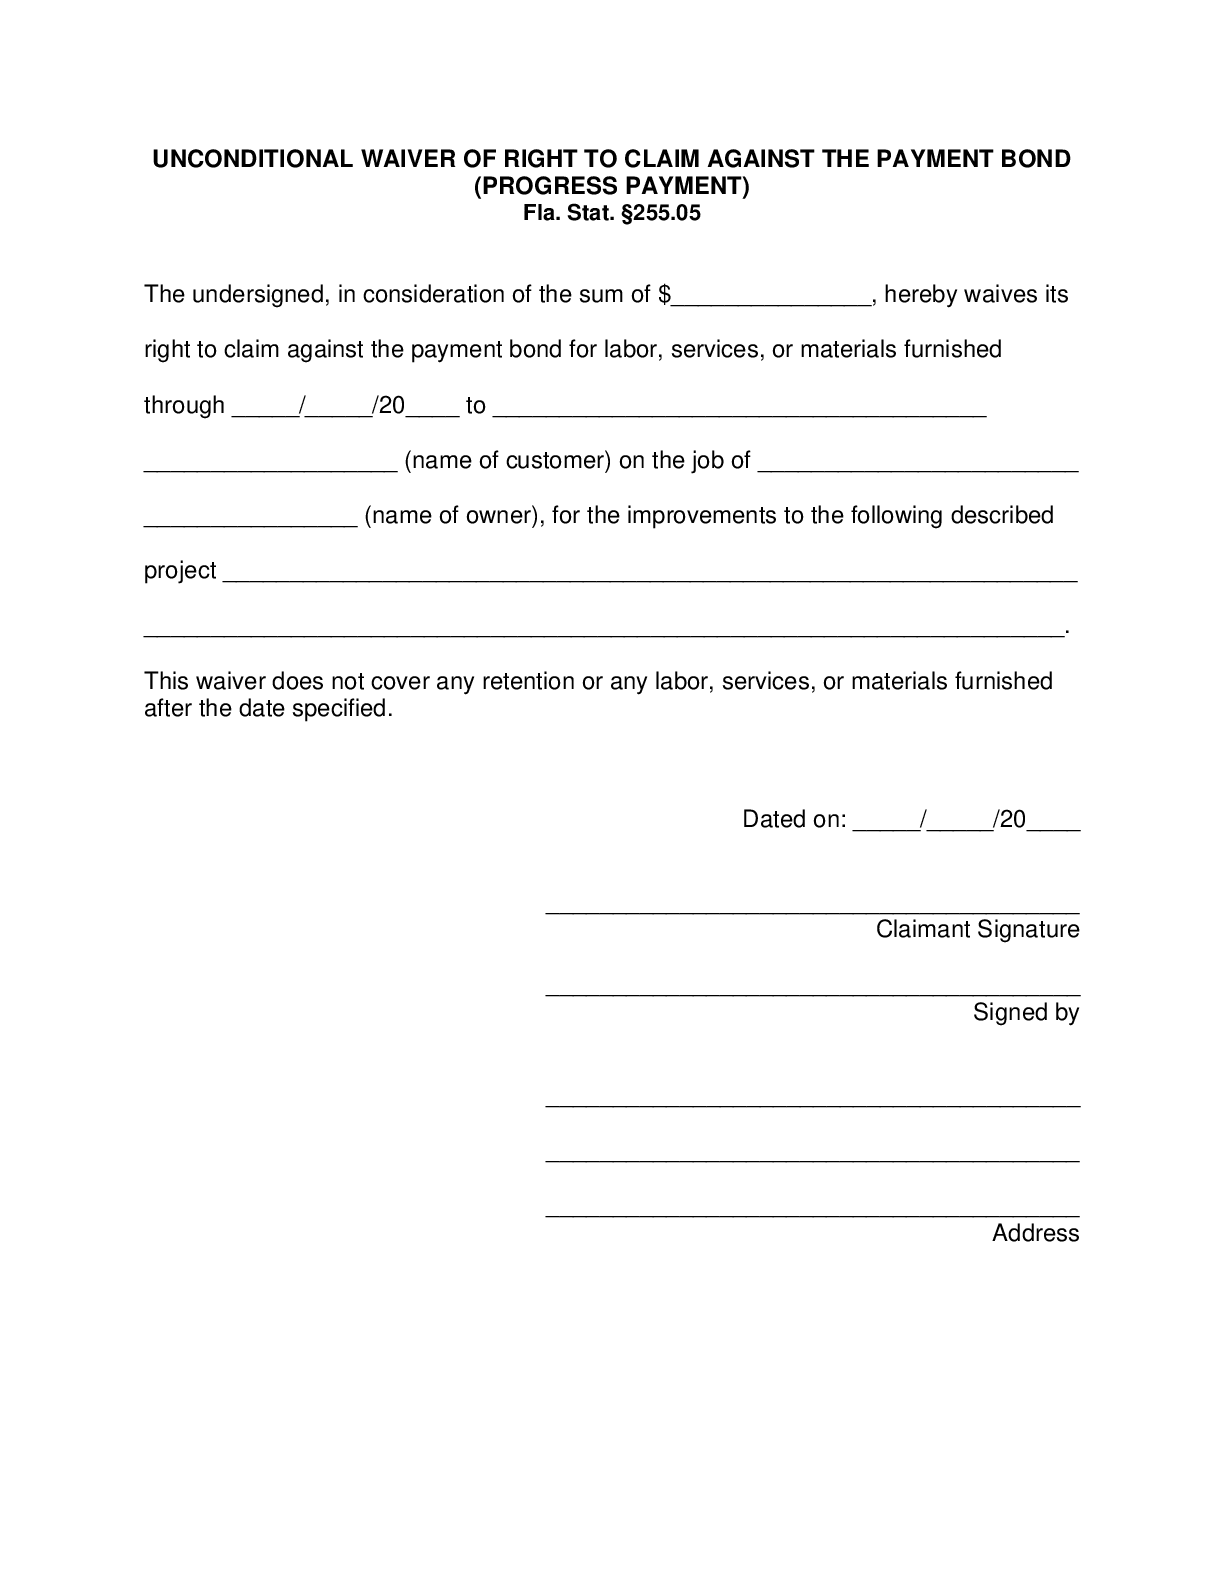 Florida Partial Unconditional Bond Waiver Form | Free Template Download - free from